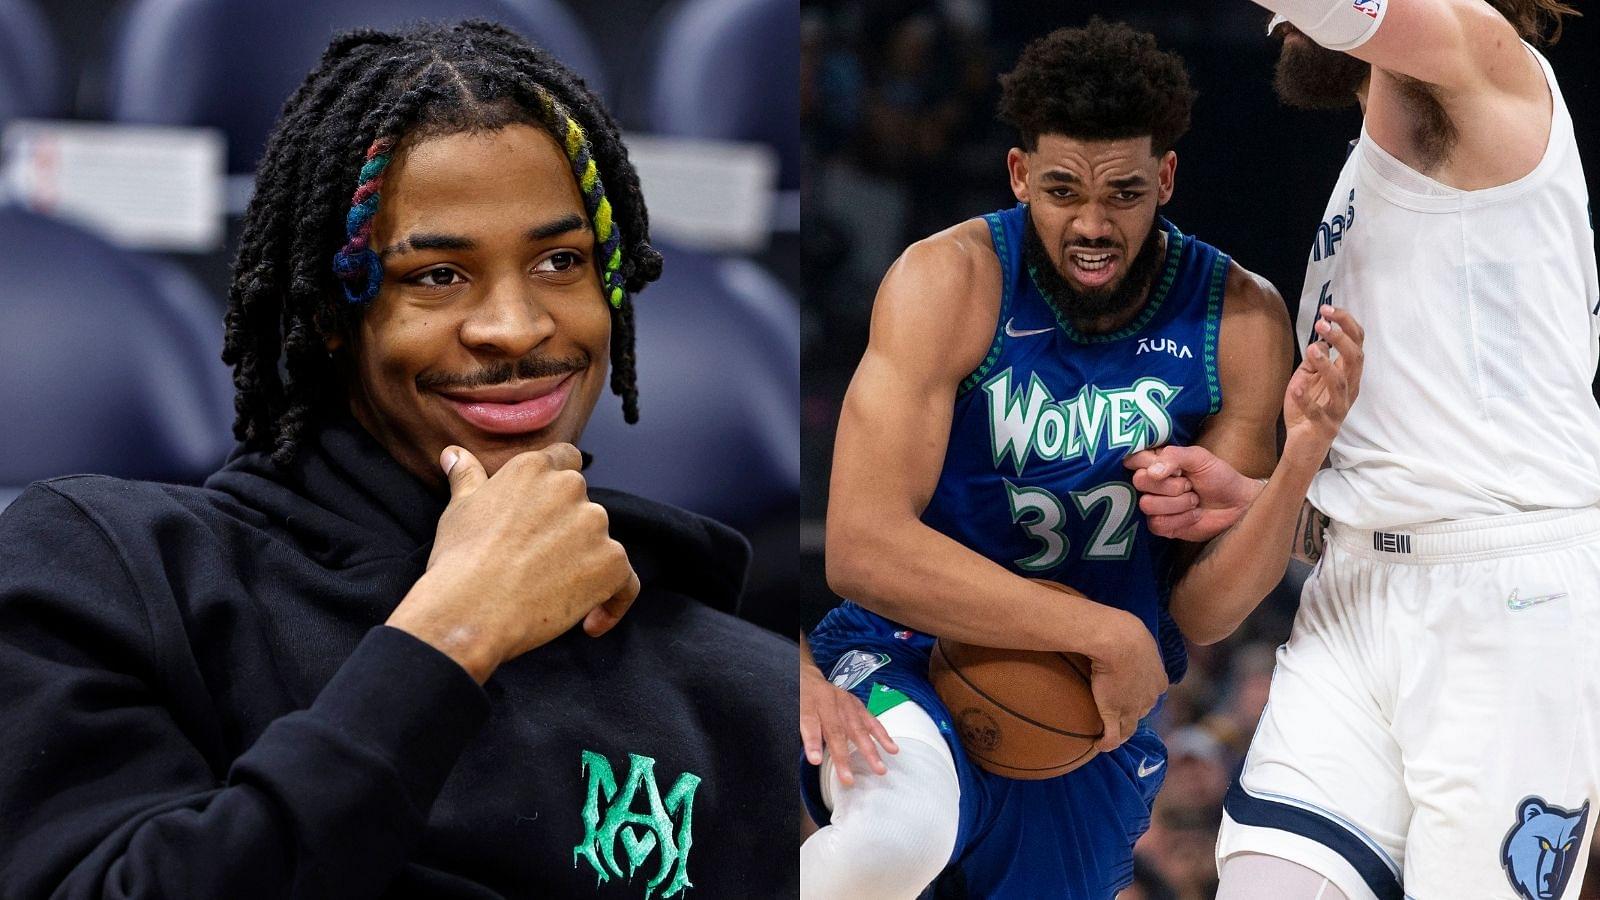 "We in Minnesota now Karl Anthony Towns???": Ja Morant destroys KAT on Twitter following Wolves All-Star's attempt to mock Grizzlies mid-game